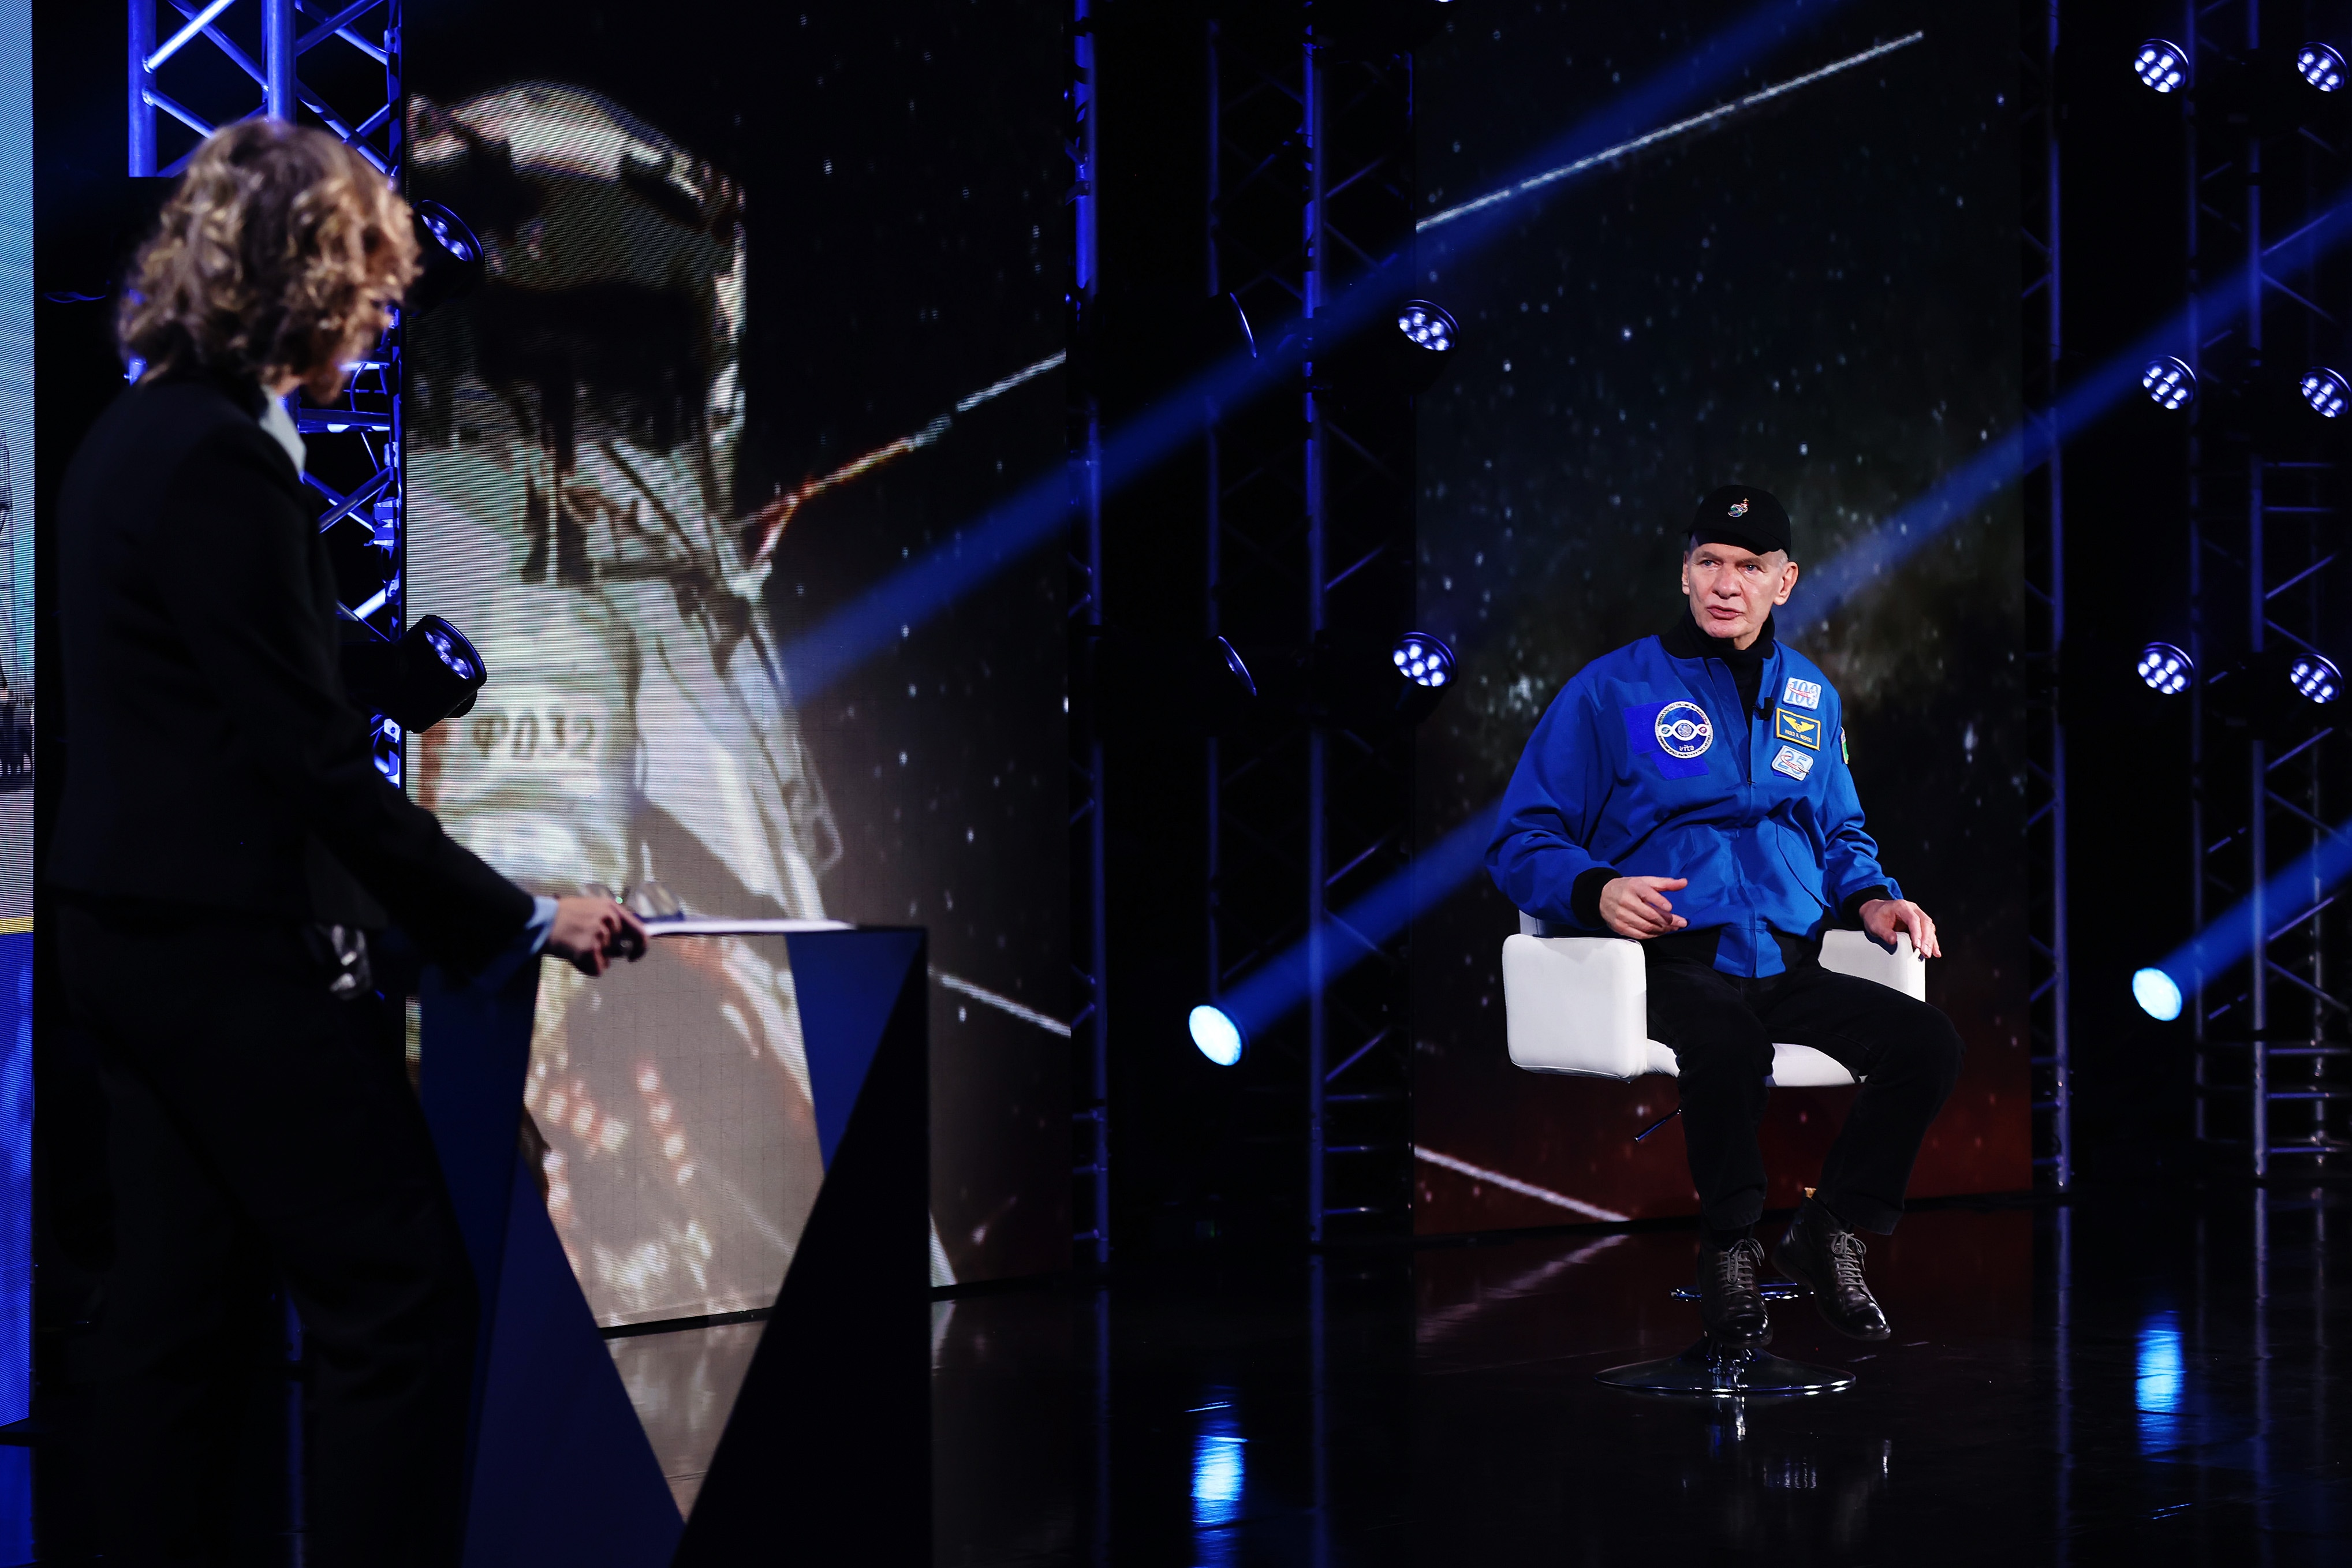 Live In Courmayeur, astronaut Nespoli on Sky TG24: “Soon space will be for everyone”